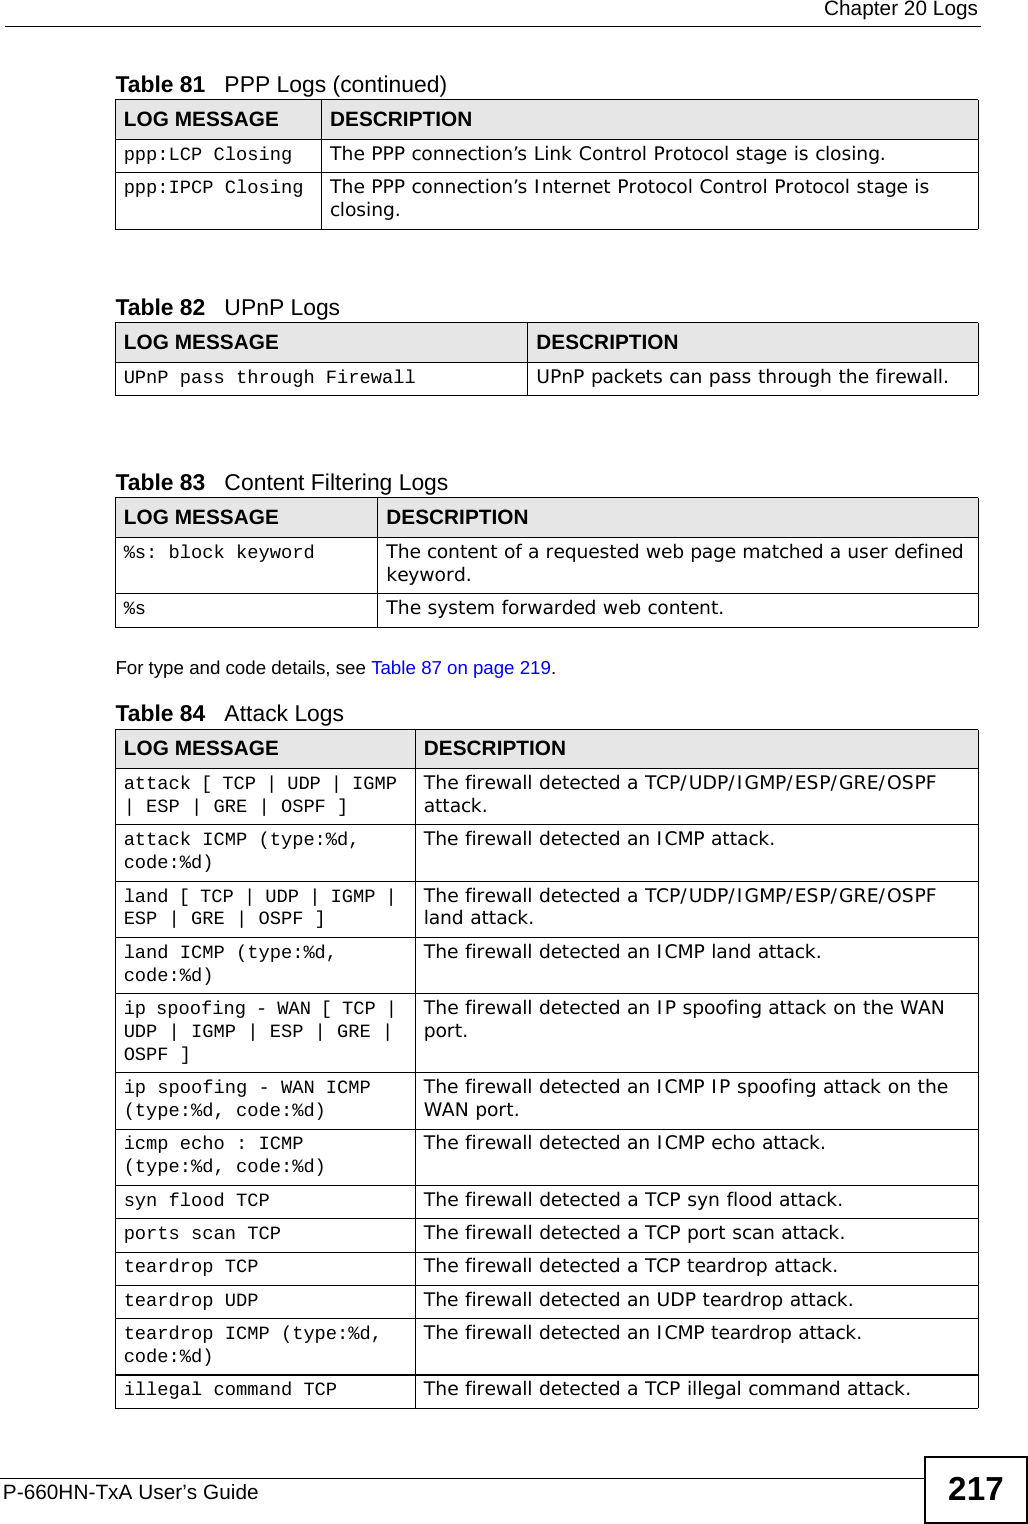  Chapter 20 LogsP-660HN-TxA User’s Guide 217   For type and code details, see Table 87 on page 219.ppp:LCP Closing The PPP connection’s Link Control Protocol stage is closing.ppp:IPCP Closing The PPP connection’s Internet Protocol Control Protocol stage is closing.Table 82   UPnP LogsLOG MESSAGE DESCRIPTIONUPnP pass through Firewall UPnP packets can pass through the firewall.Table 83   Content Filtering LogsLOG MESSAGE DESCRIPTION%s: block keyword The content of a requested web page matched a user defined keyword.%s The system forwarded web content.Table 84   Attack LogsLOG MESSAGE DESCRIPTIONattack [ TCP | UDP | IGMP | ESP | GRE | OSPF ] The firewall detected a TCP/UDP/IGMP/ESP/GRE/OSPF attack.attack ICMP (type:%d, code:%d) The firewall detected an ICMP attack.land [ TCP | UDP | IGMP | ESP | GRE | OSPF ] The firewall detected a TCP/UDP/IGMP/ESP/GRE/OSPF land attack.land ICMP (type:%d, code:%d) The firewall detected an ICMP land attack.ip spoofing - WAN [ TCP | UDP | IGMP | ESP | GRE | OSPF ]The firewall detected an IP spoofing attack on the WAN port.ip spoofing - WAN ICMP (type:%d, code:%d) The firewall detected an ICMP IP spoofing attack on the WAN port. icmp echo : ICMP (type:%d, code:%d) The firewall detected an ICMP echo attack. syn flood TCP The firewall detected a TCP syn flood attack.ports scan TCP The firewall detected a TCP port scan attack.teardrop TCP The firewall detected a TCP teardrop attack.teardrop UDP The firewall detected an UDP teardrop attack.teardrop ICMP (type:%d, code:%d) The firewall detected an ICMP teardrop attack. illegal command TCP The firewall detected a TCP illegal command attack.Table 81   PPP Logs (continued)LOG MESSAGE DESCRIPTION